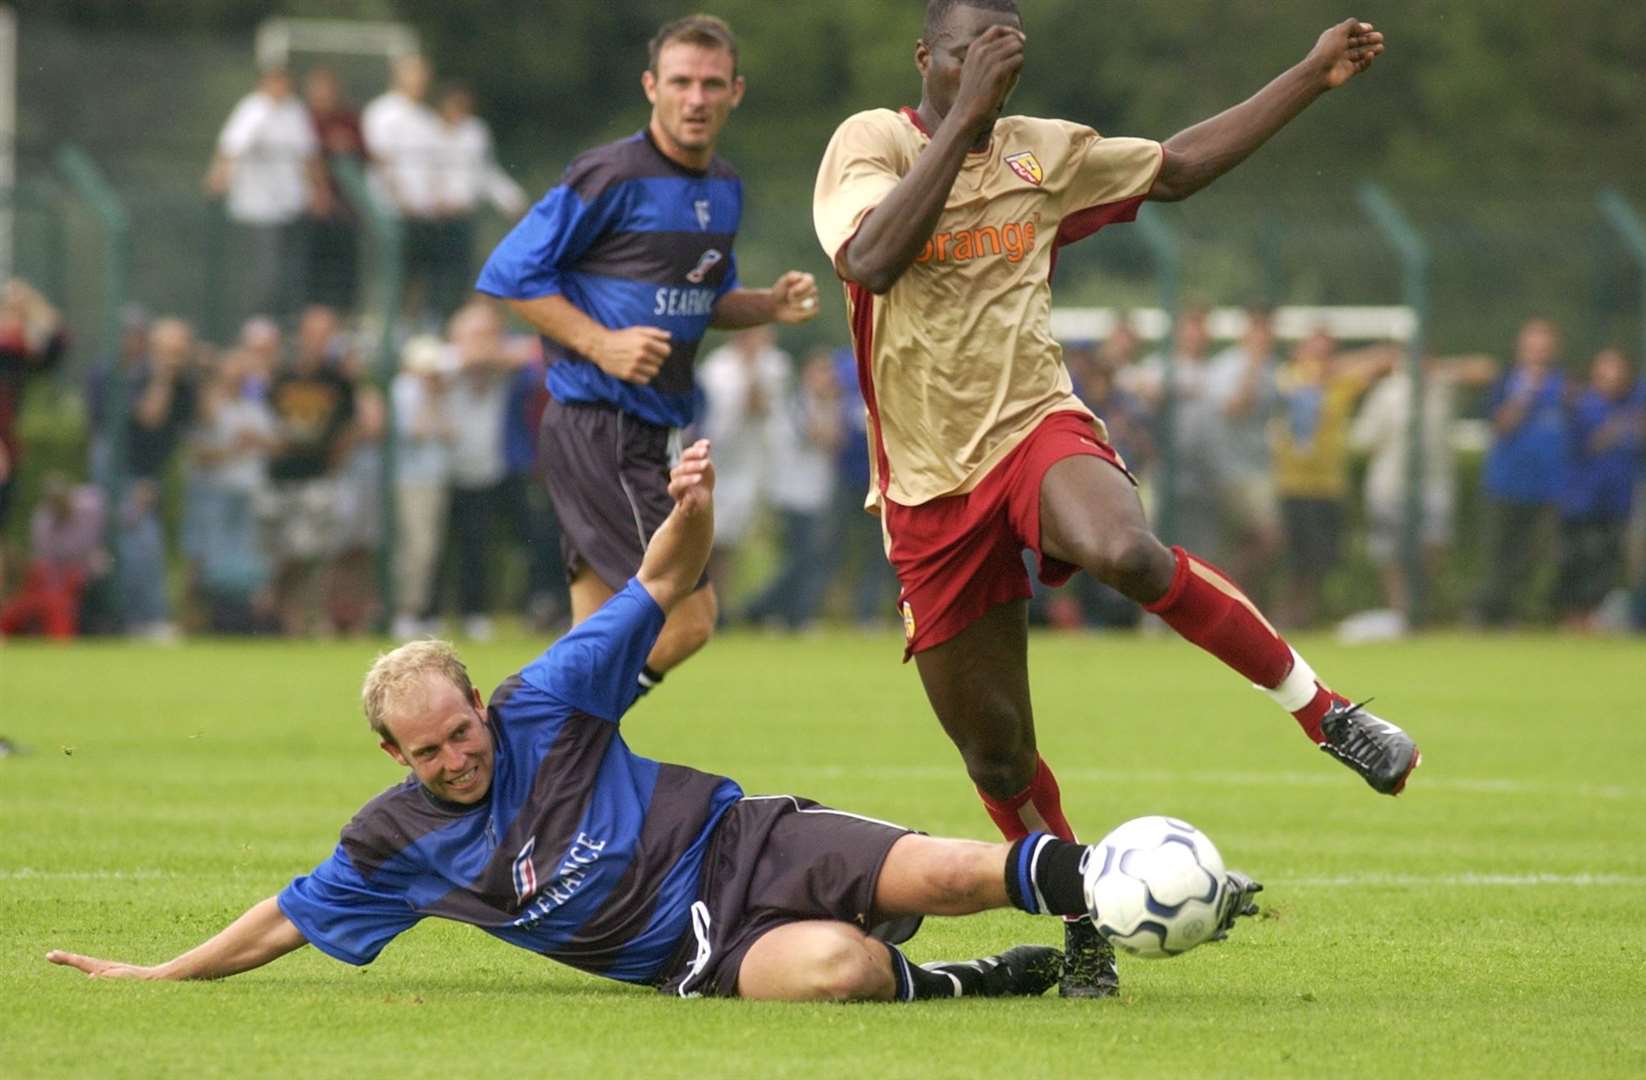 A trip to Le Touquet for the Gills in 2003 when they played a match against Lens